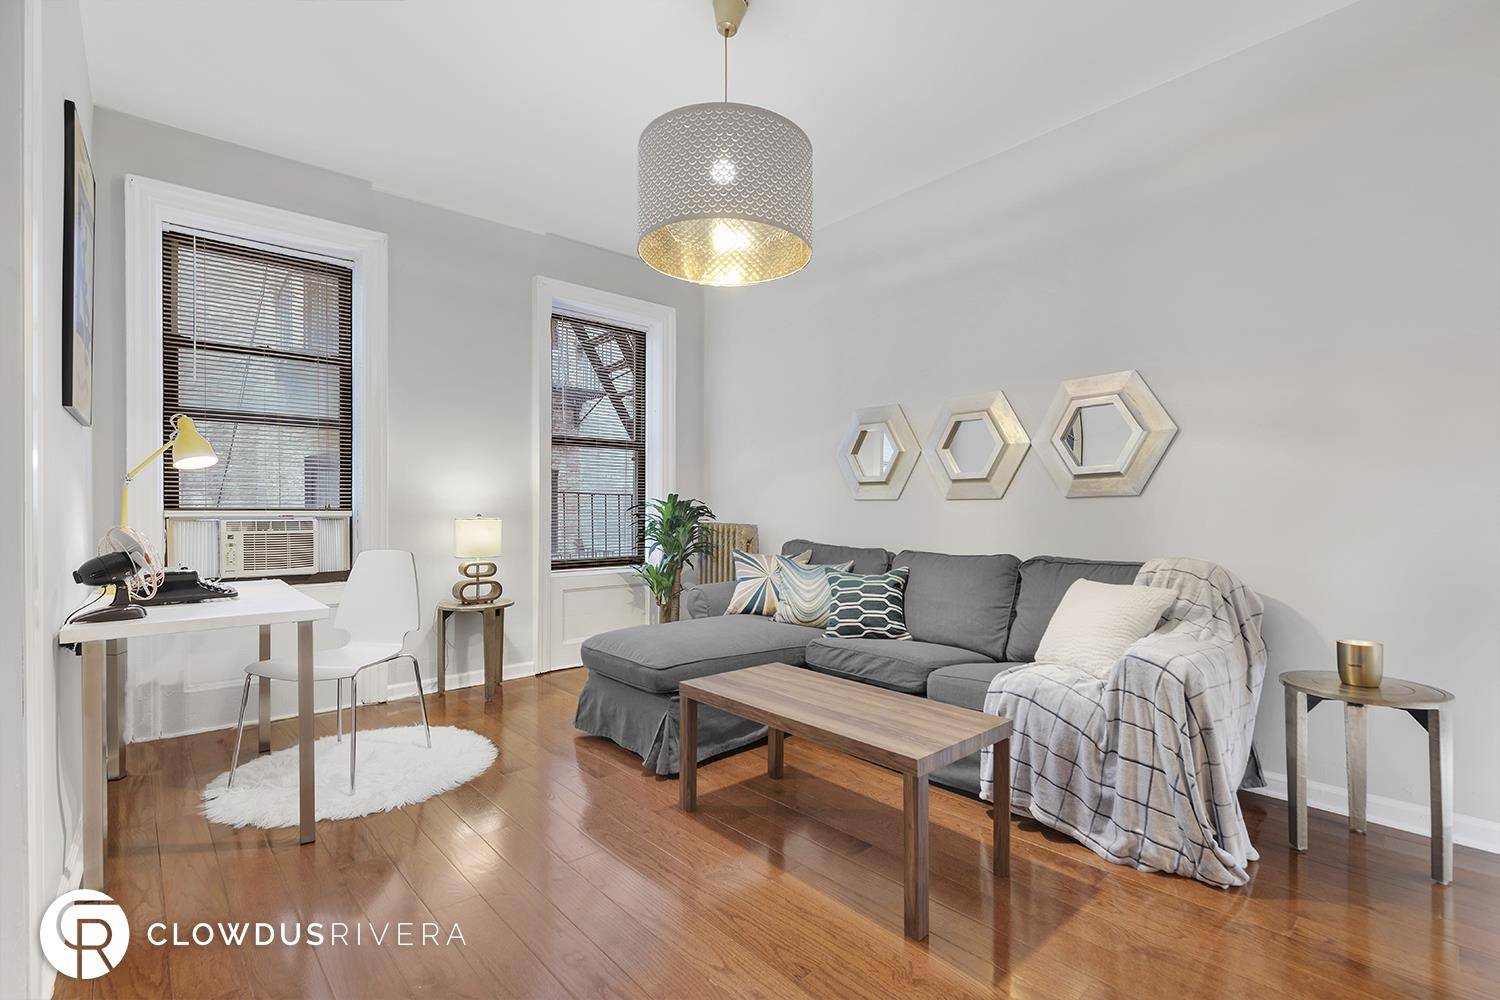 CHARMING ONE BEDROOM WITH NEW FLOORS amp ; WASHER DRYERThe Belford Condominium 160 Wadsworth Avenue, Apt 209Kindly note that all showings and open houses are by appointment.